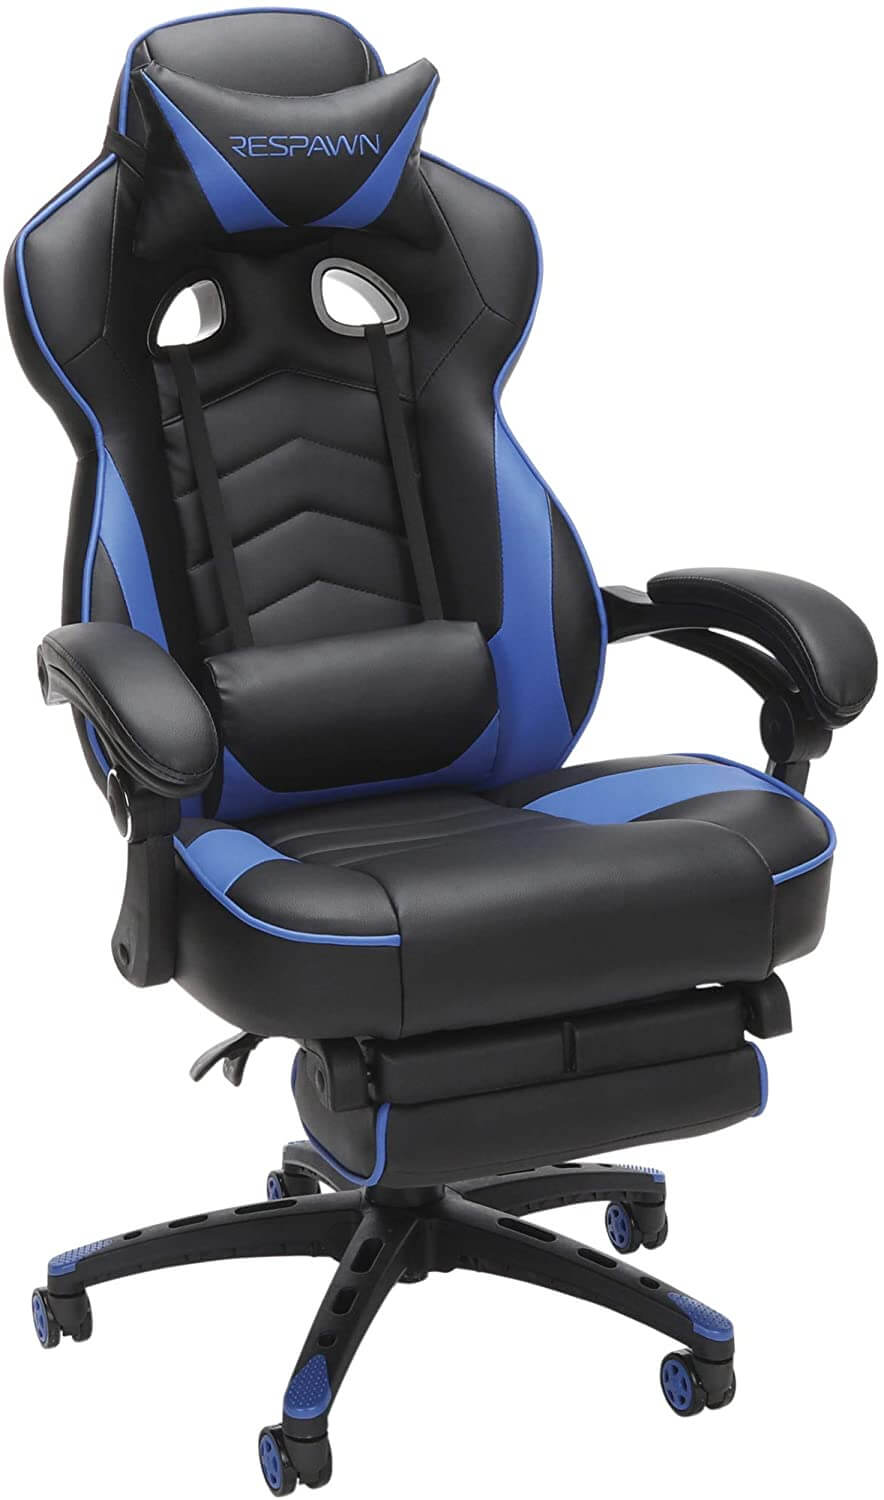 7 Best Budget Gaming Chair 2020 Reviews And Buying Guide